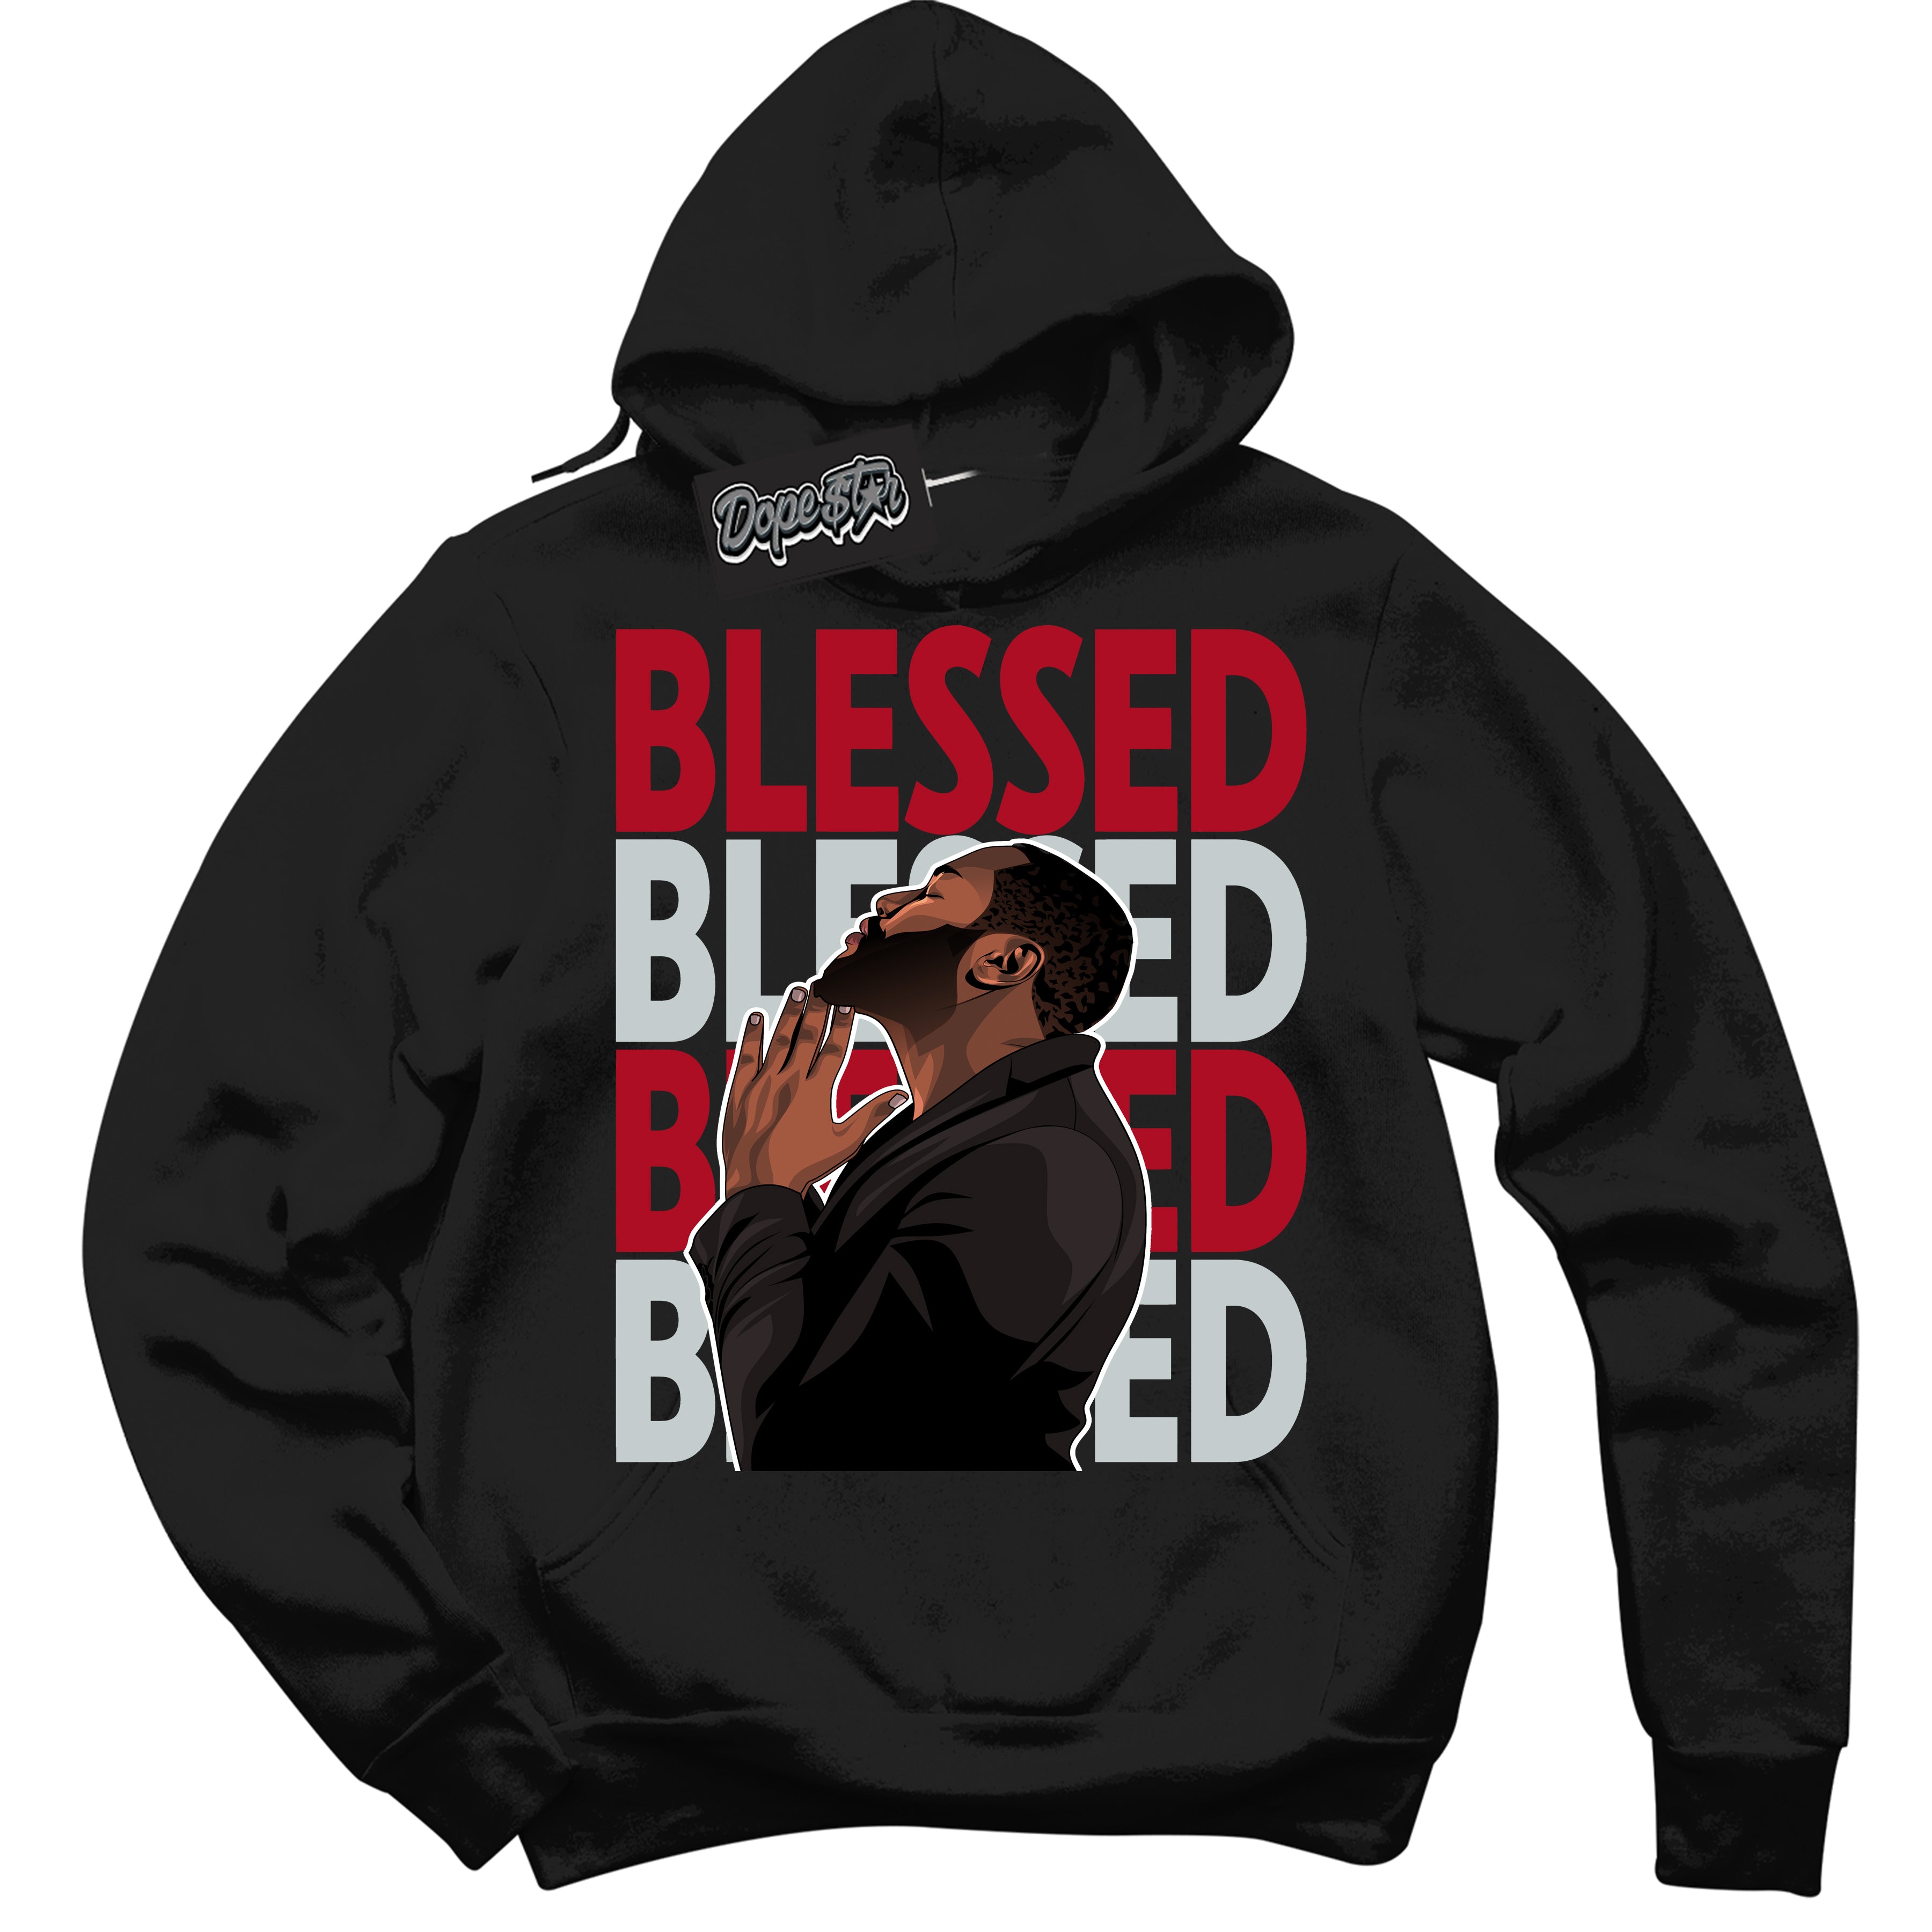 Cool Black Hoodie with “ God Blessed ”  design that Perfectly Matches  Reverse Ultraman Sneakers.